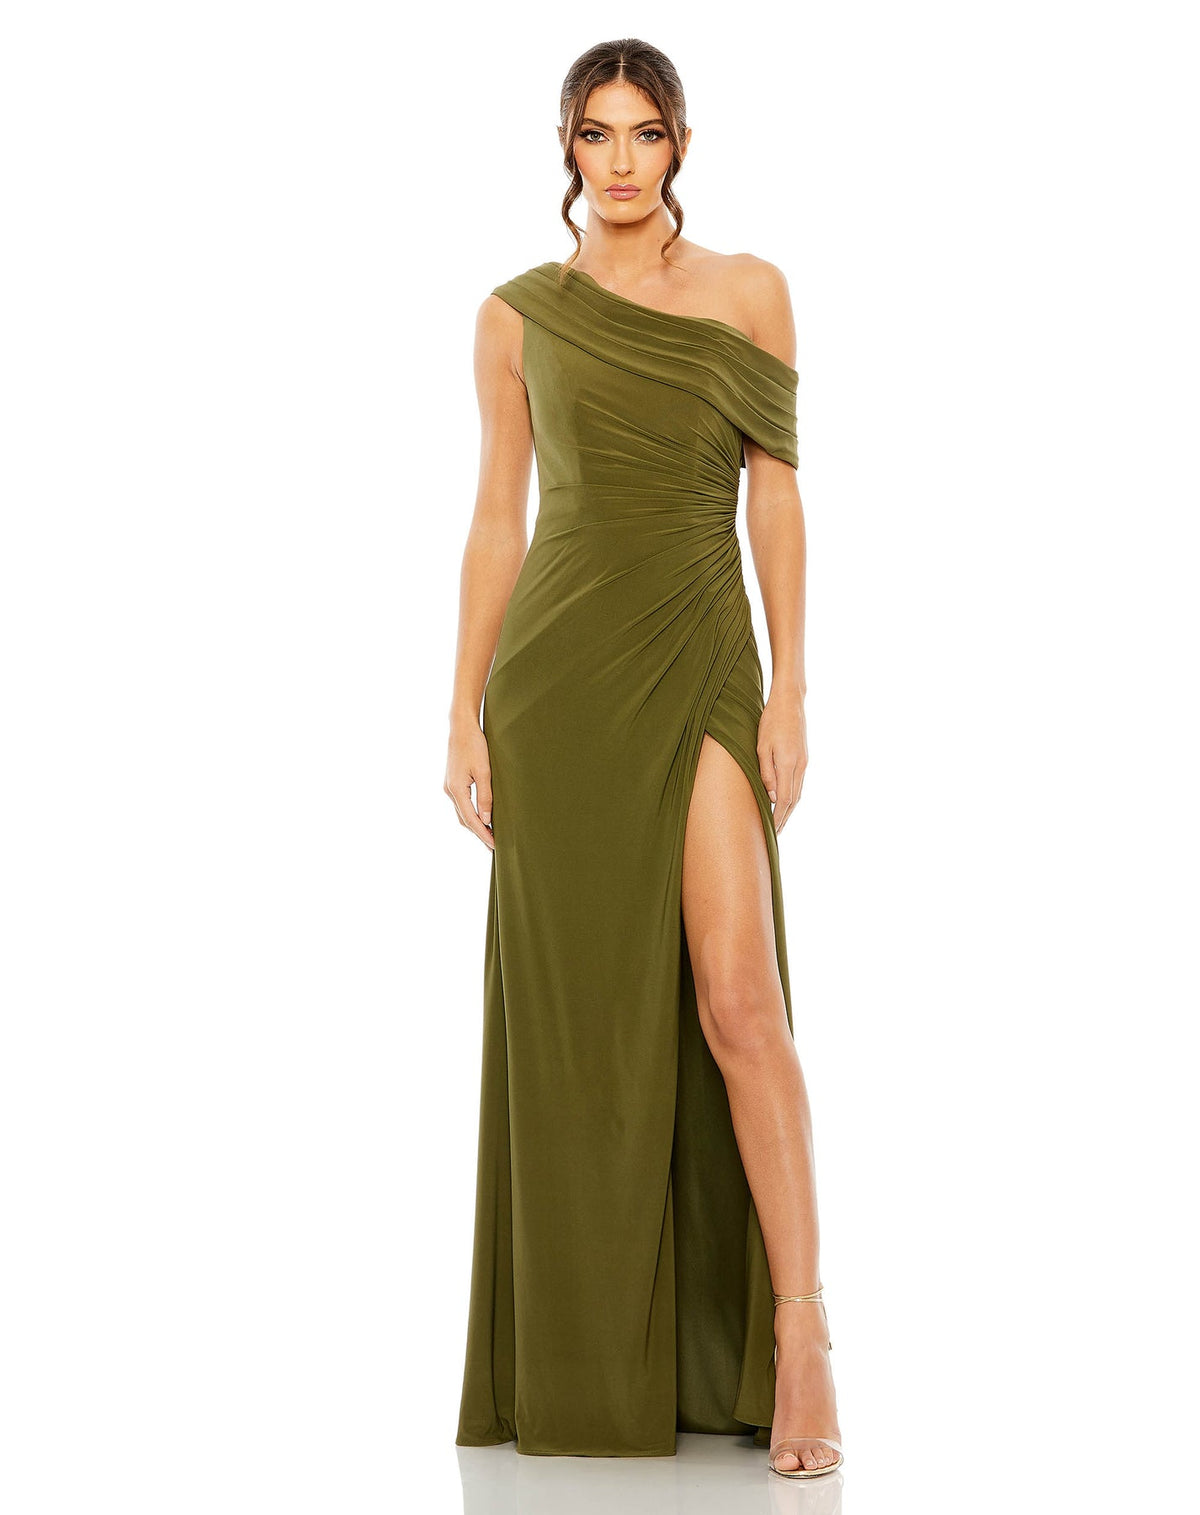 Foldover ruched jersey evening gown - Charcoal